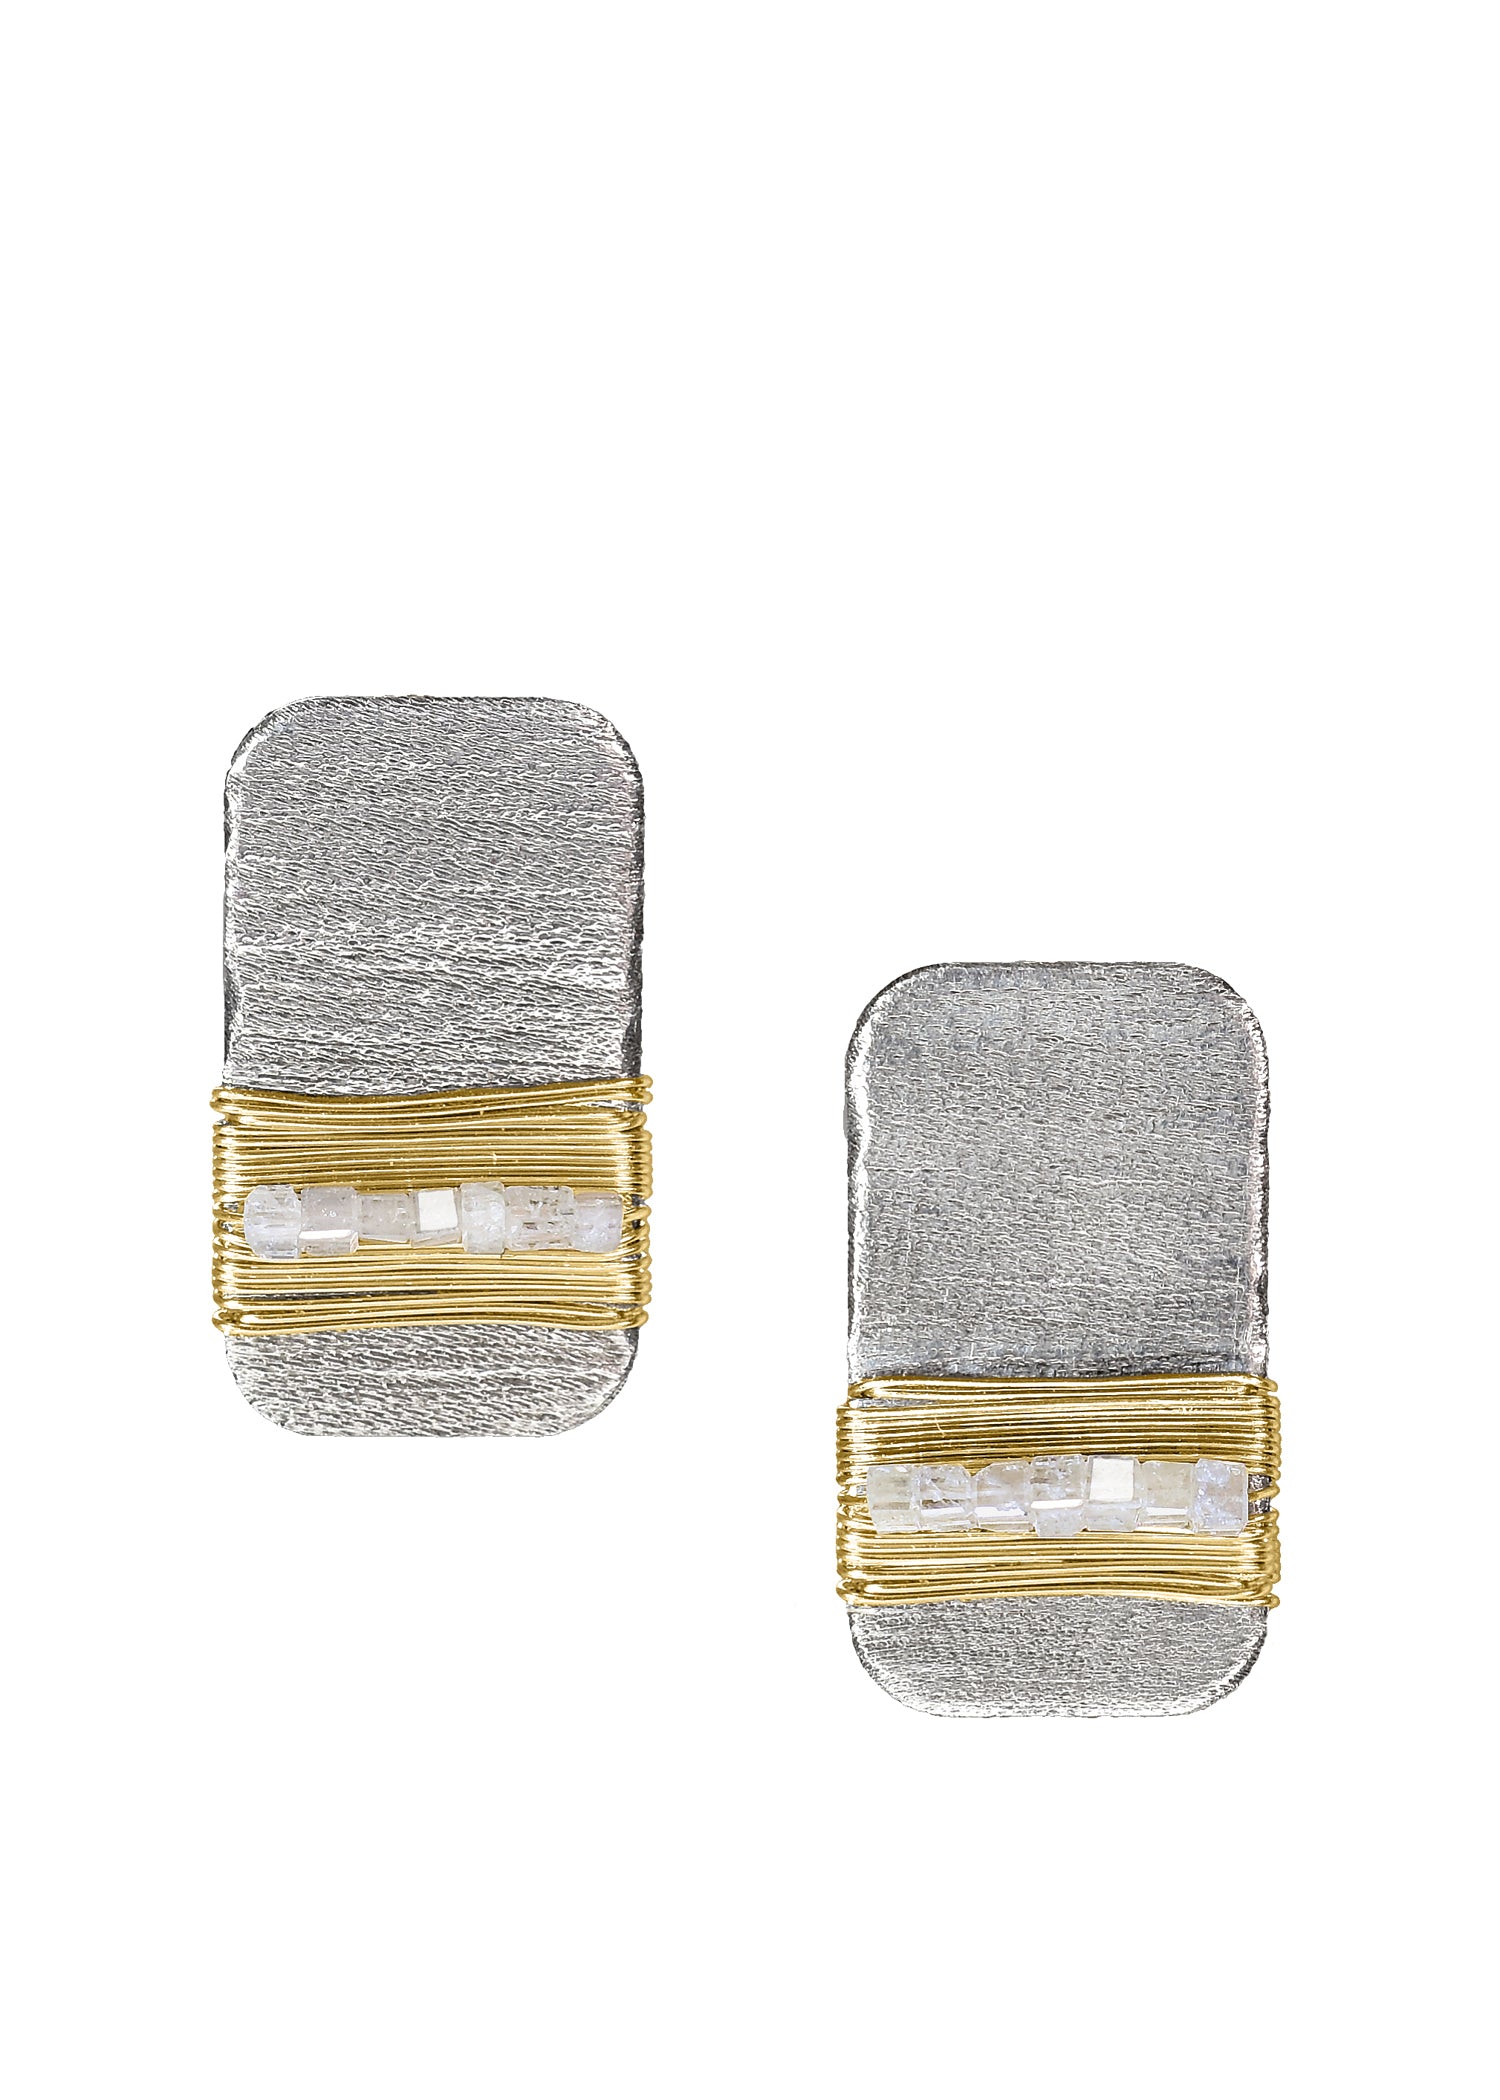 Diamond 14k gold Sterling silver Mixed metal Earrings measure 11/16" in length and 3/8" in width Handmade in our Los Angeles studio